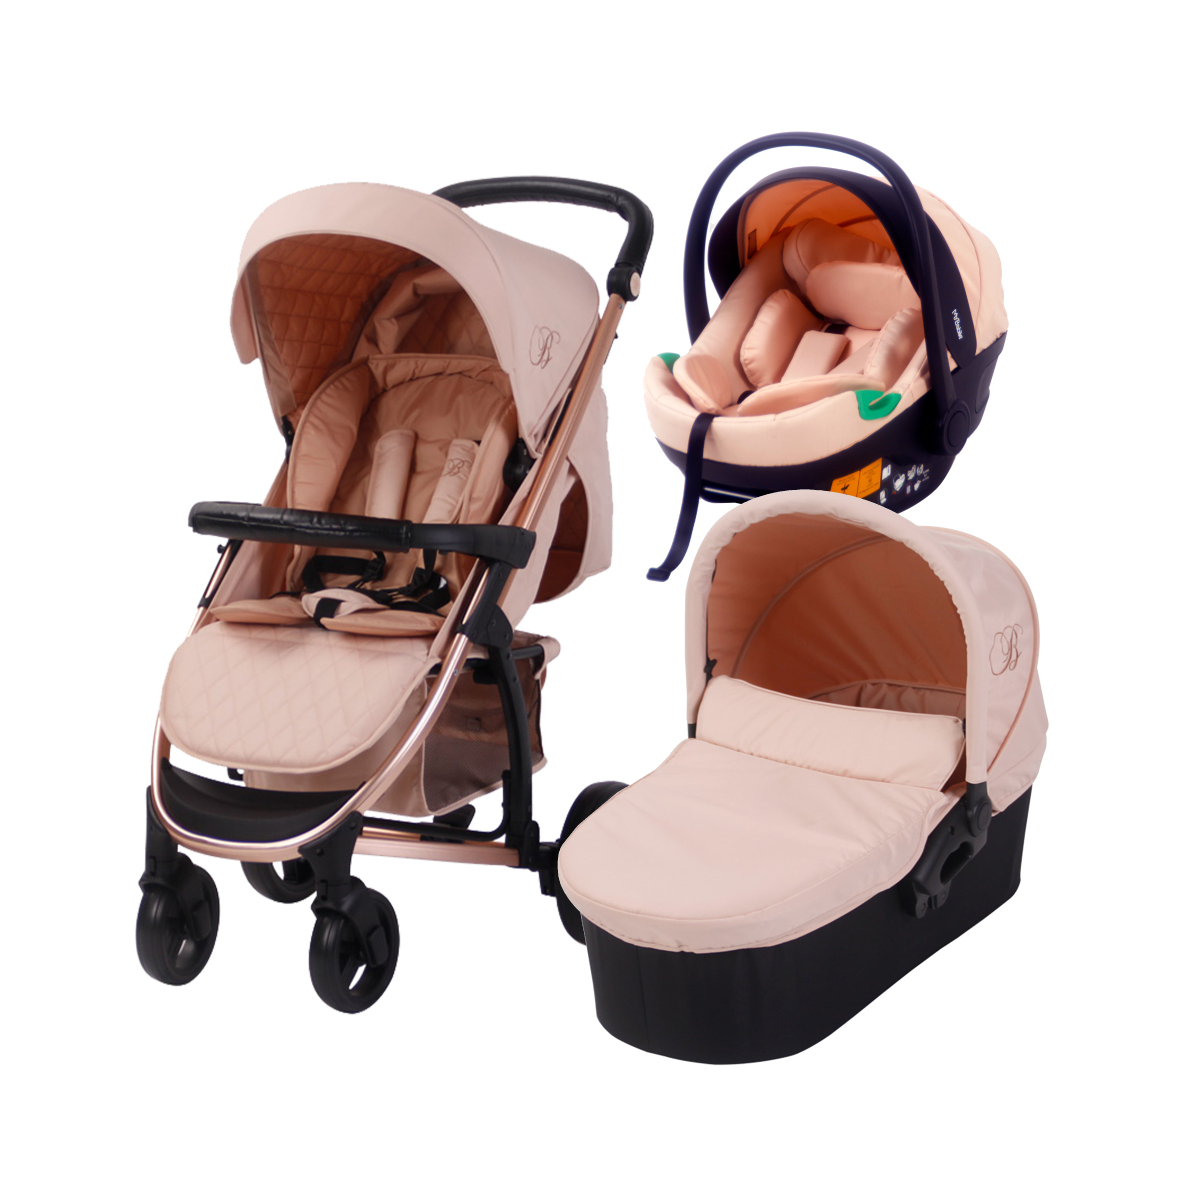 My Babiie MB200i Billie Faiers iSize Travel System